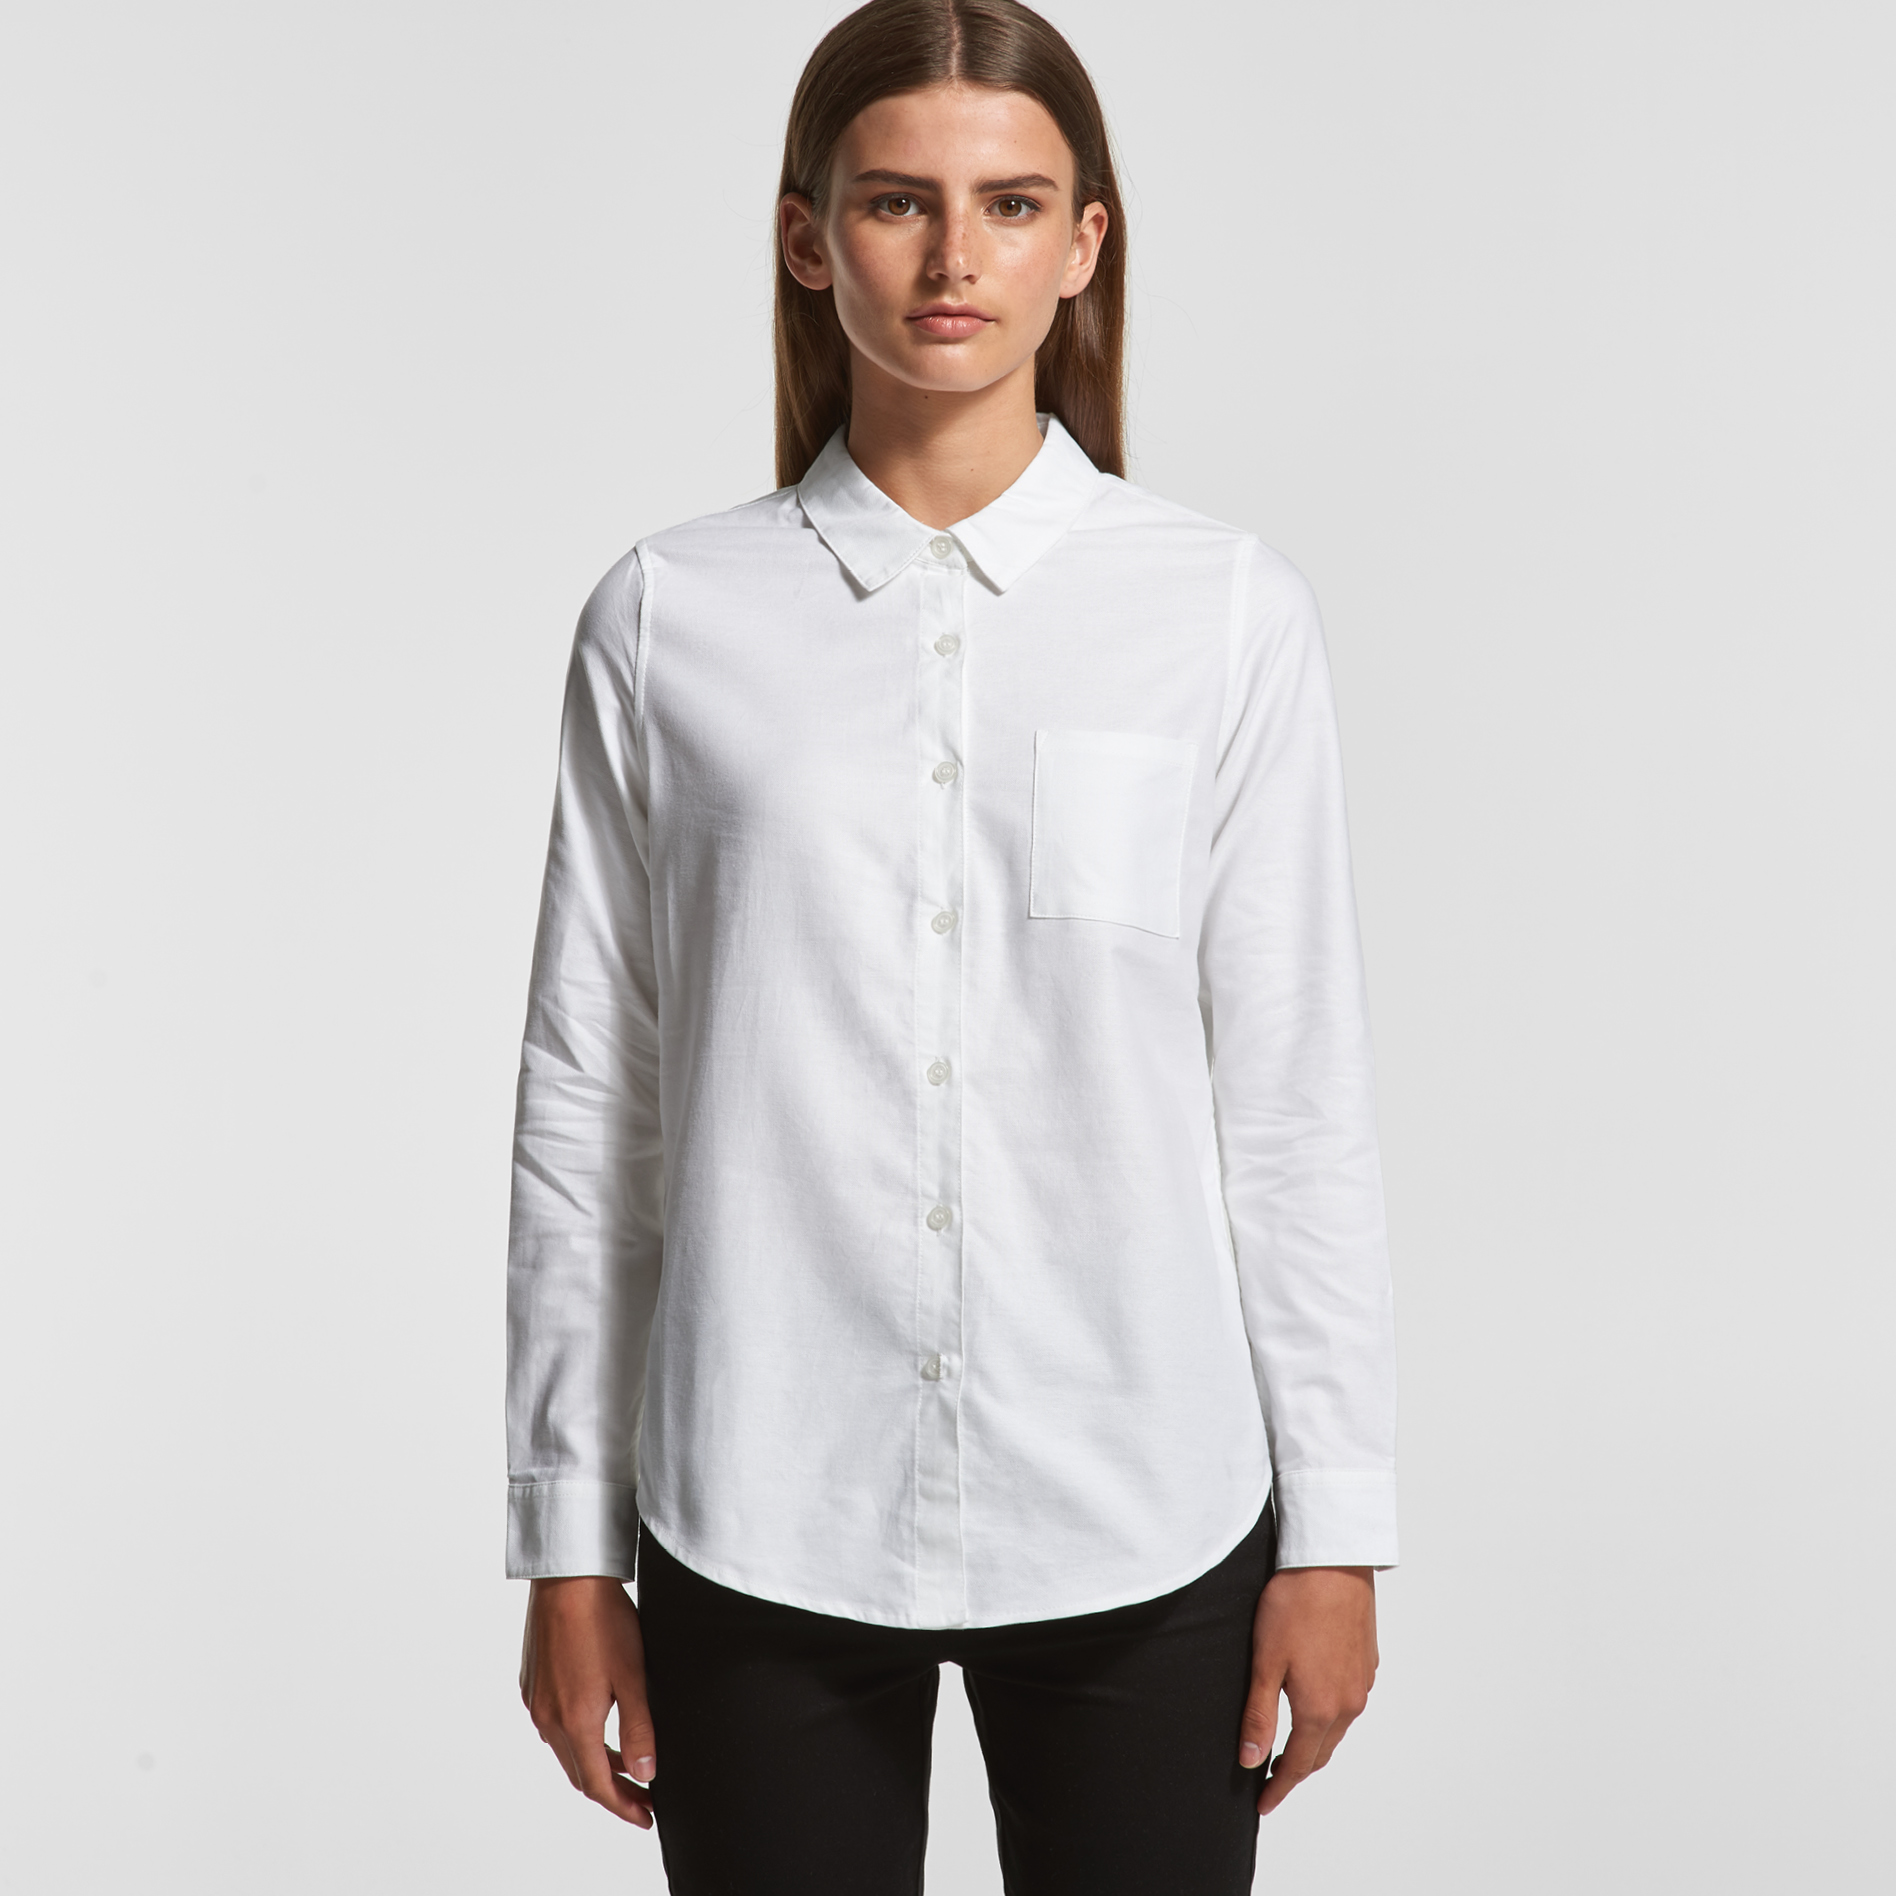 Women's Oxford Shirt | AS Colour | Withers and Co